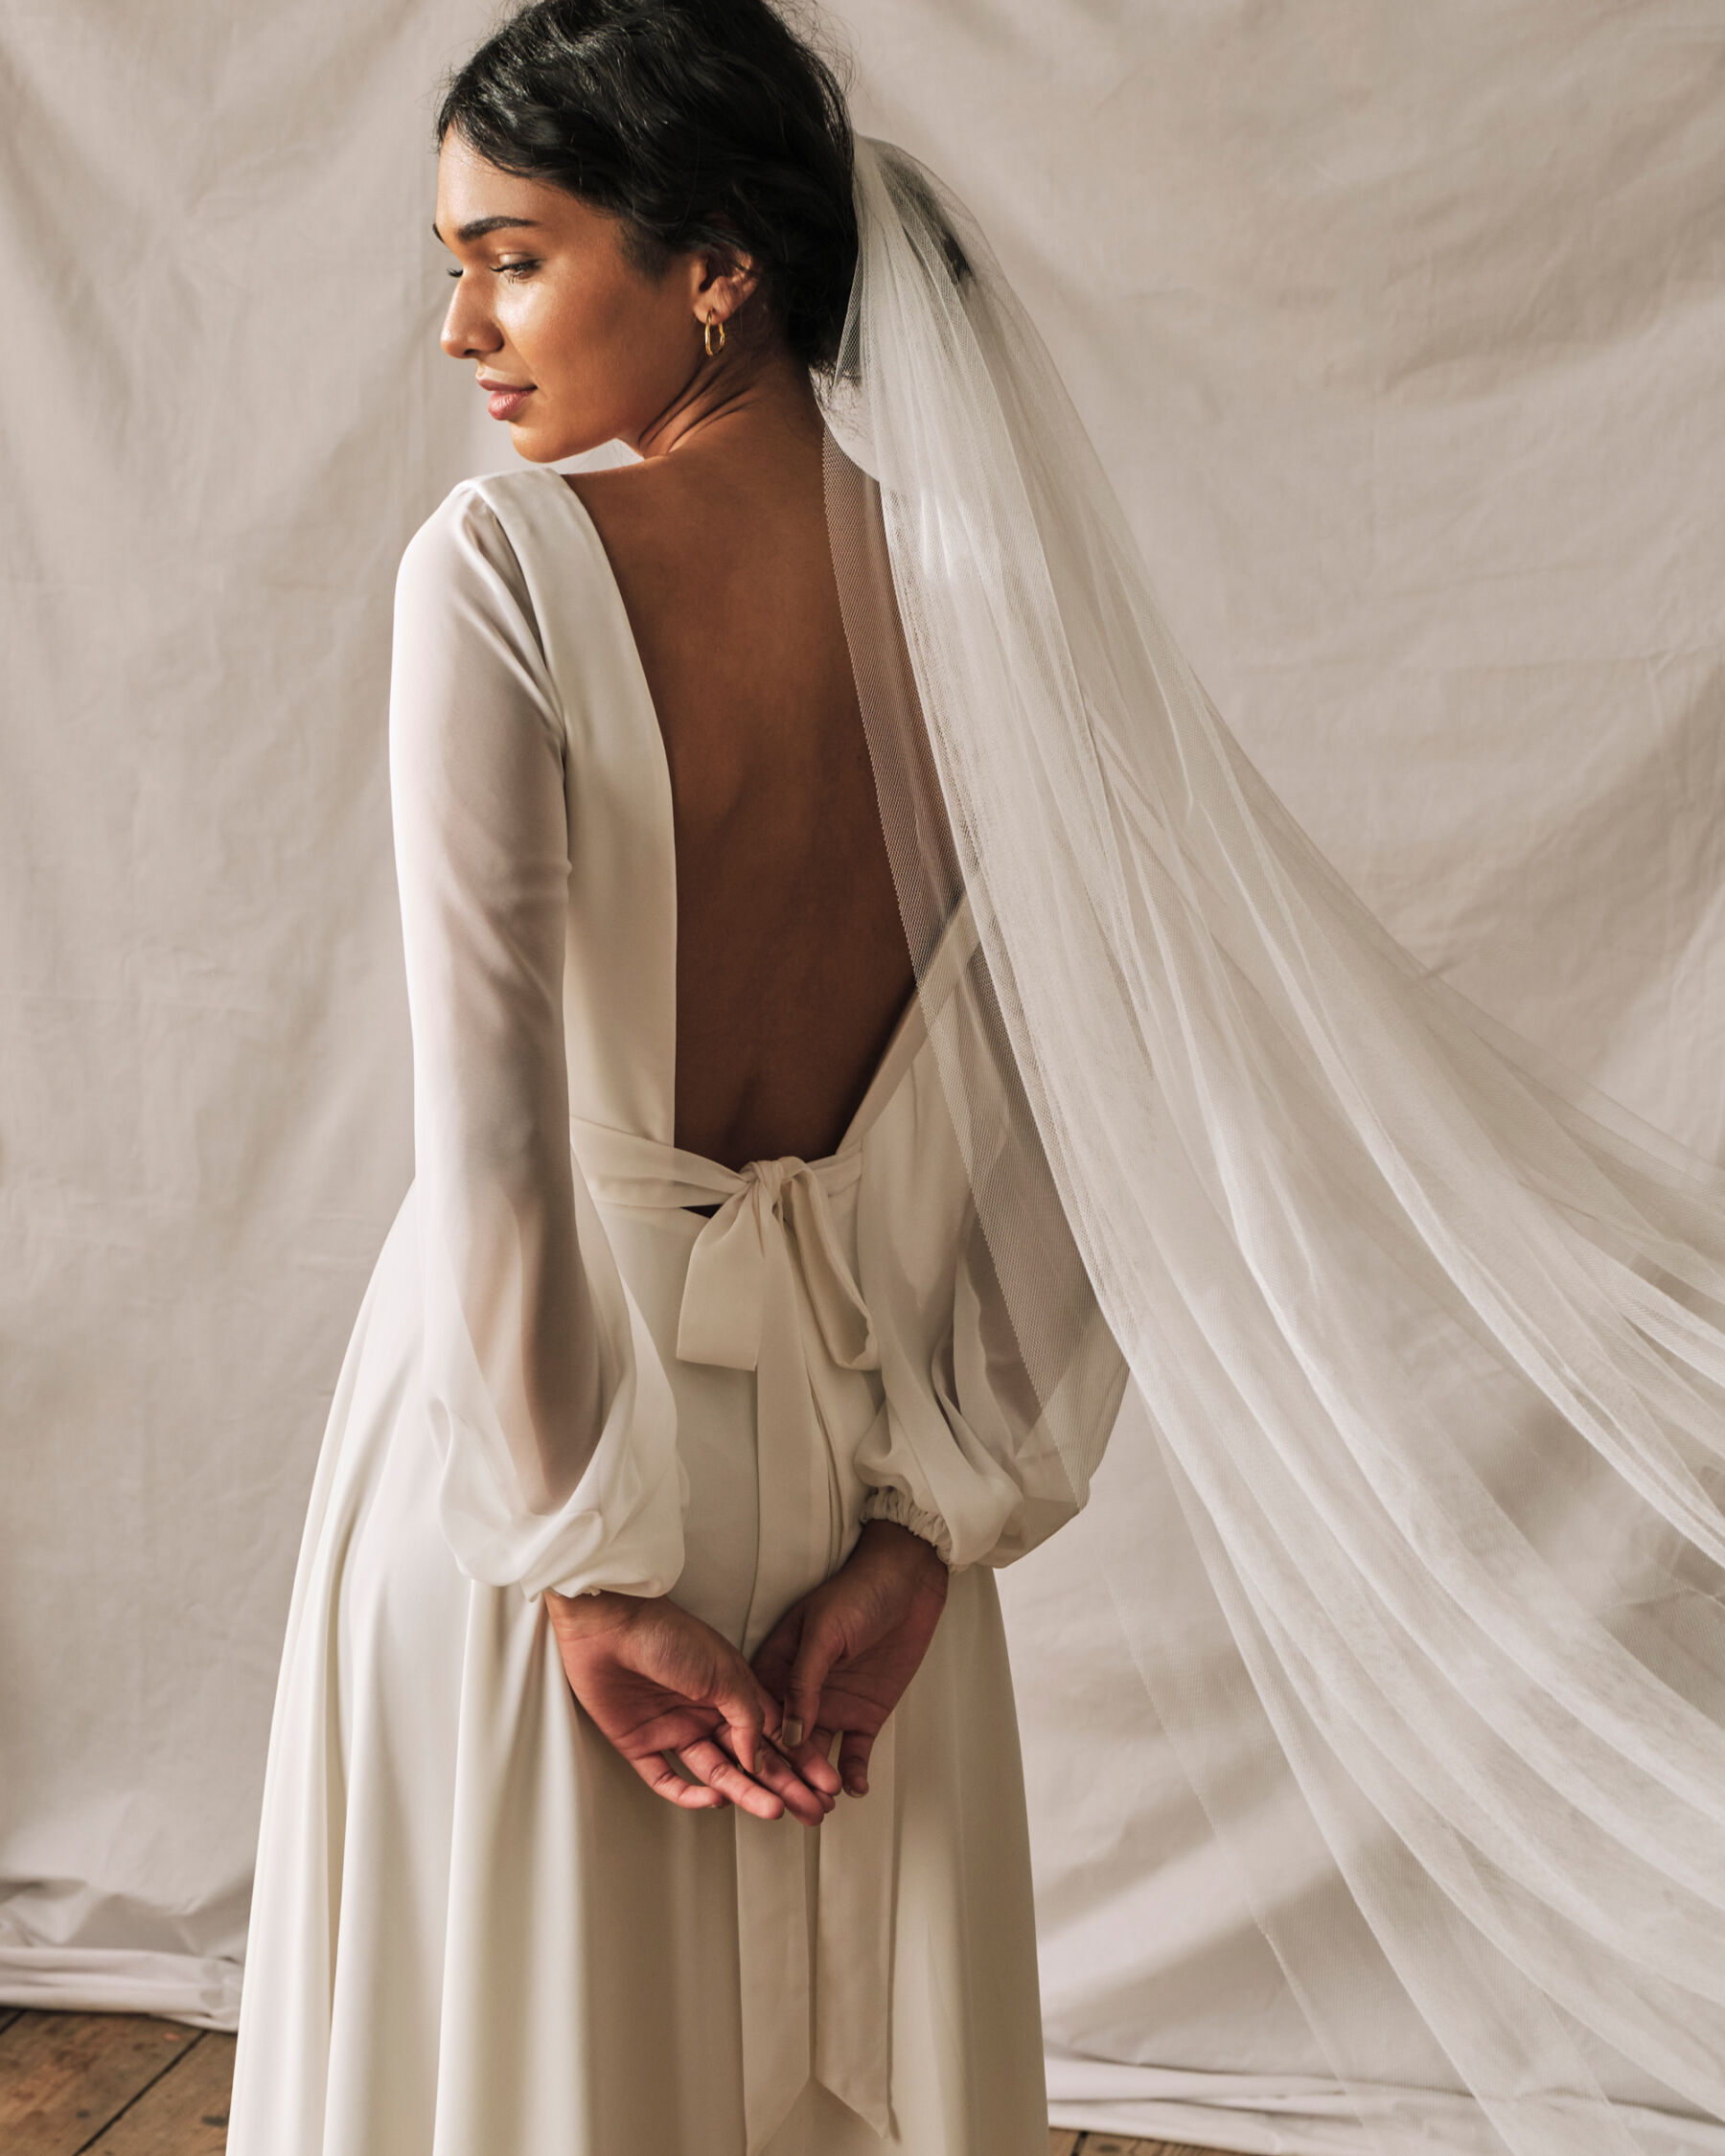 Modern, backless, simple wedding dress by Sophie Rose Bridal. Worn with a long wedding veil.